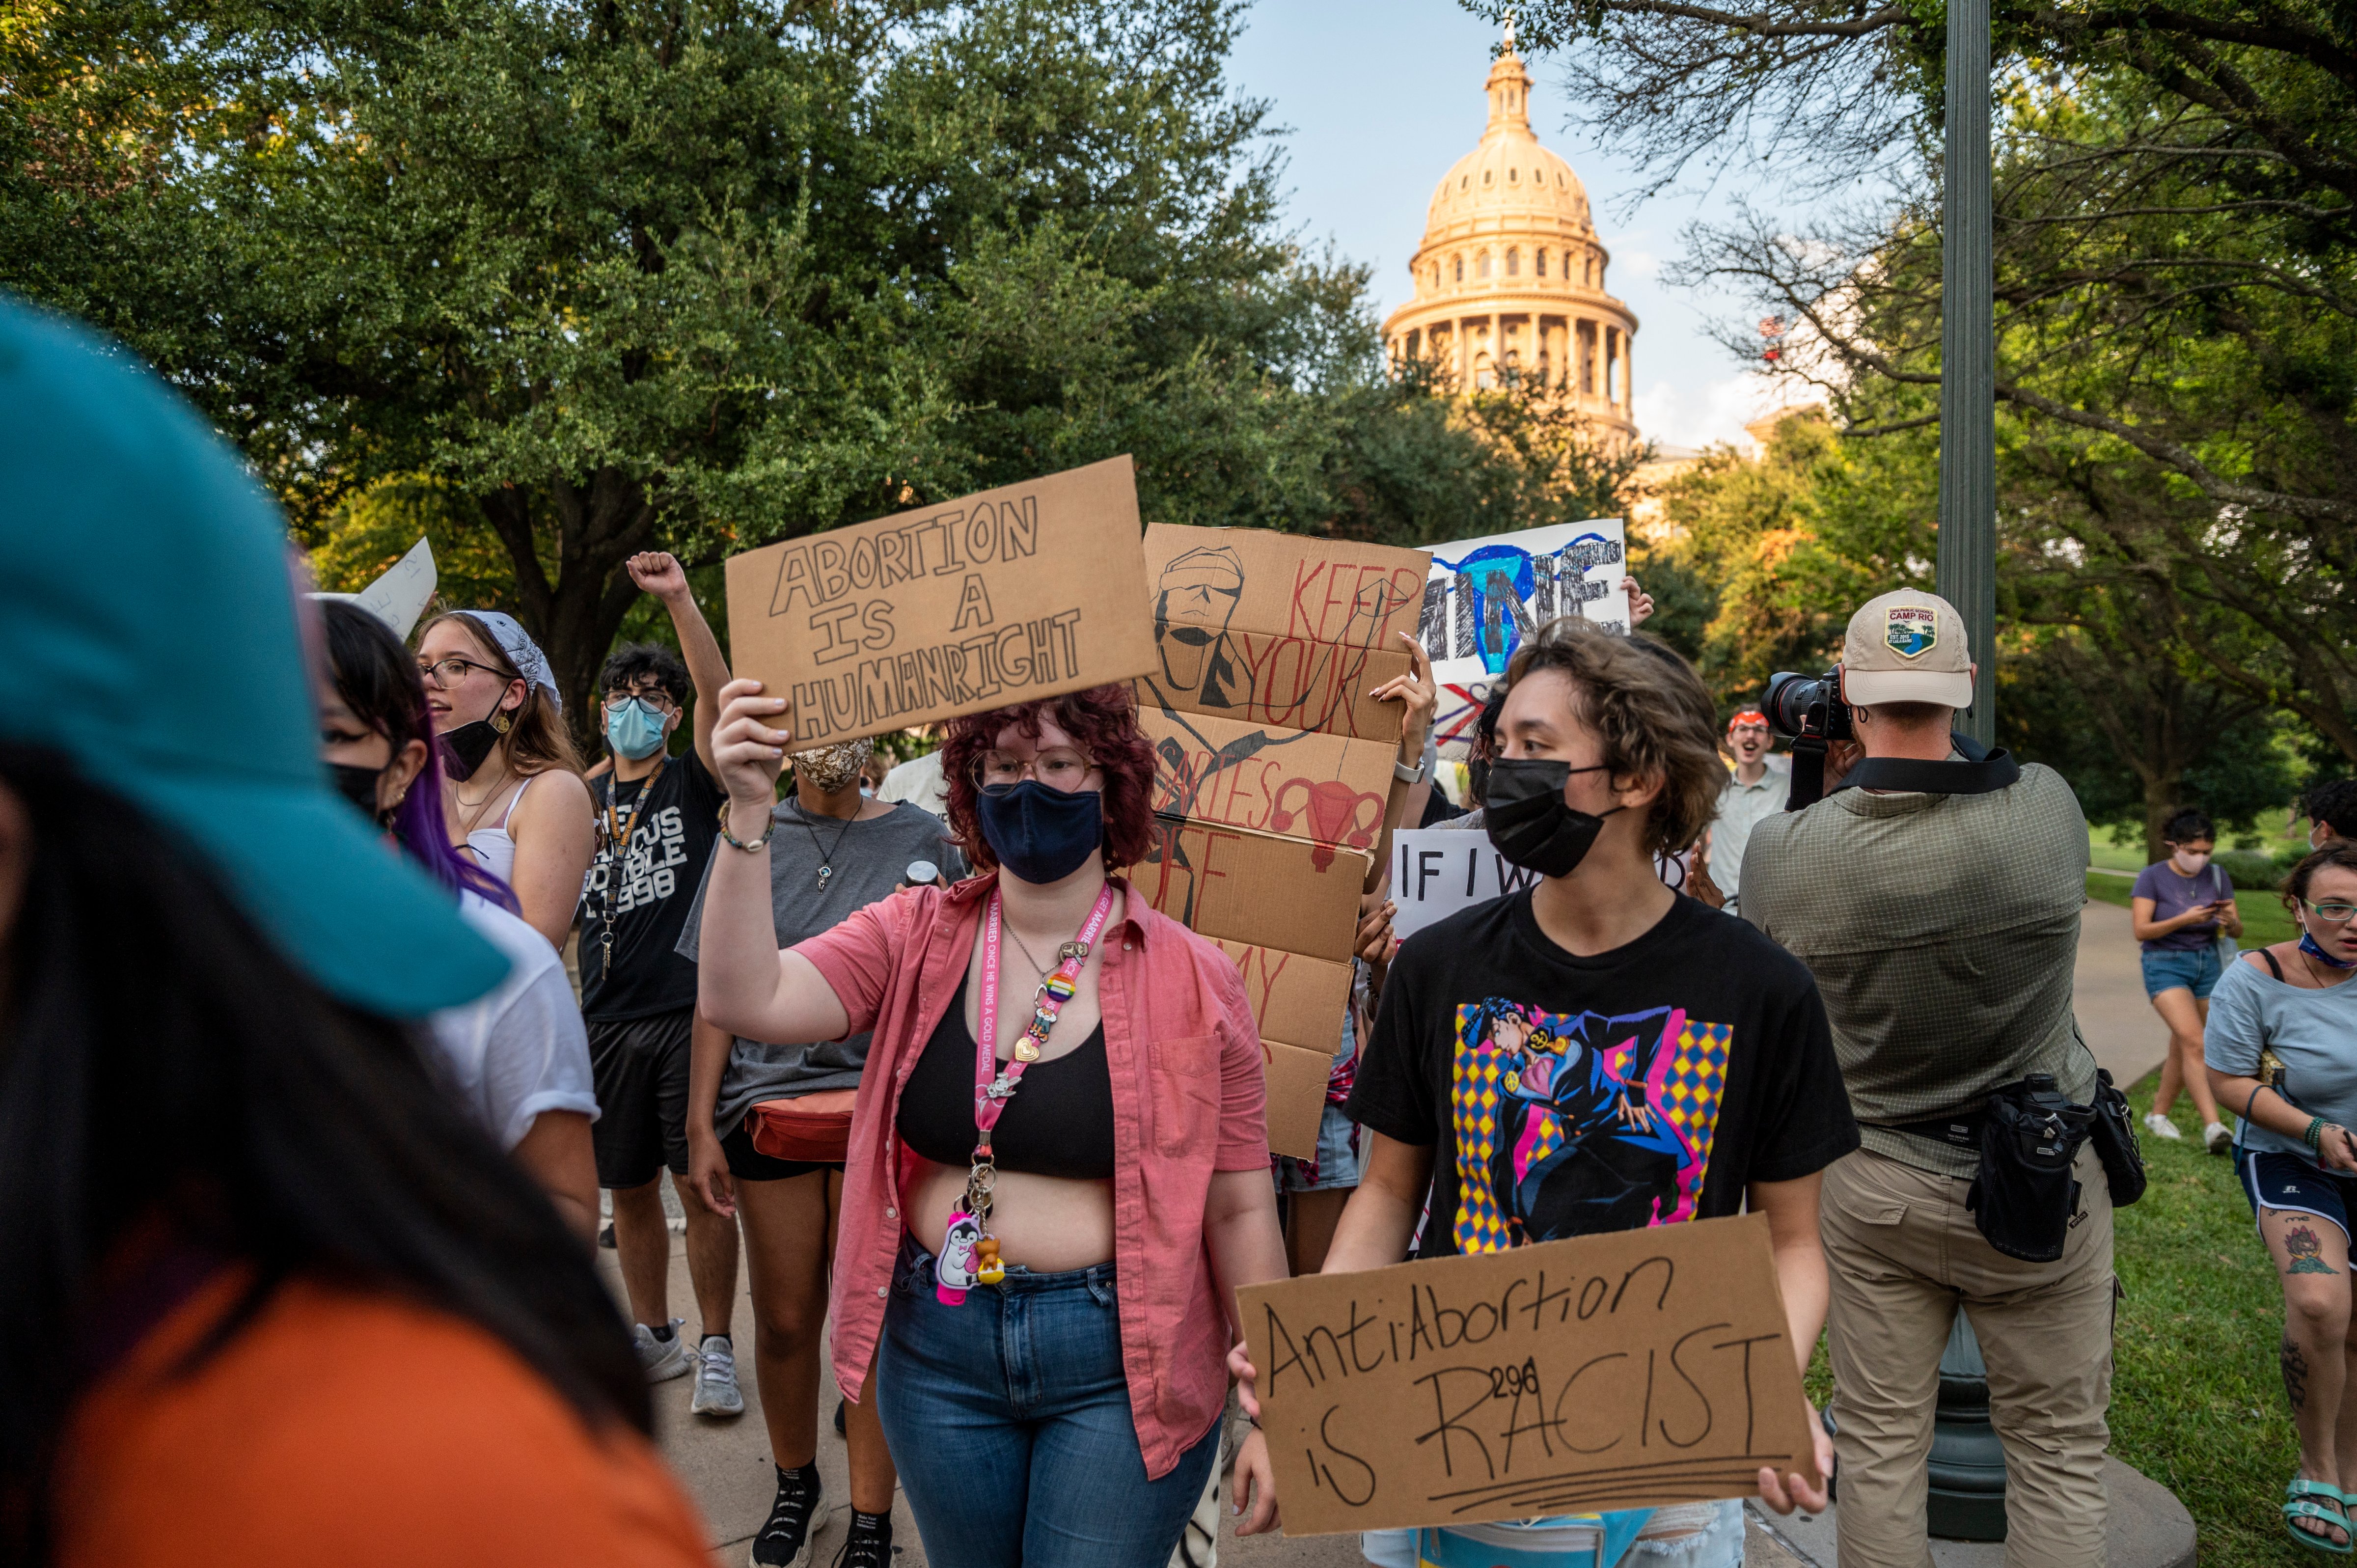 Abortion rights protesters march outside the Texas State Capitol in Austin on Sept. 1. Texas passed S.B. 8, which bans nearly all abortions and it went into effect Sept. 1.